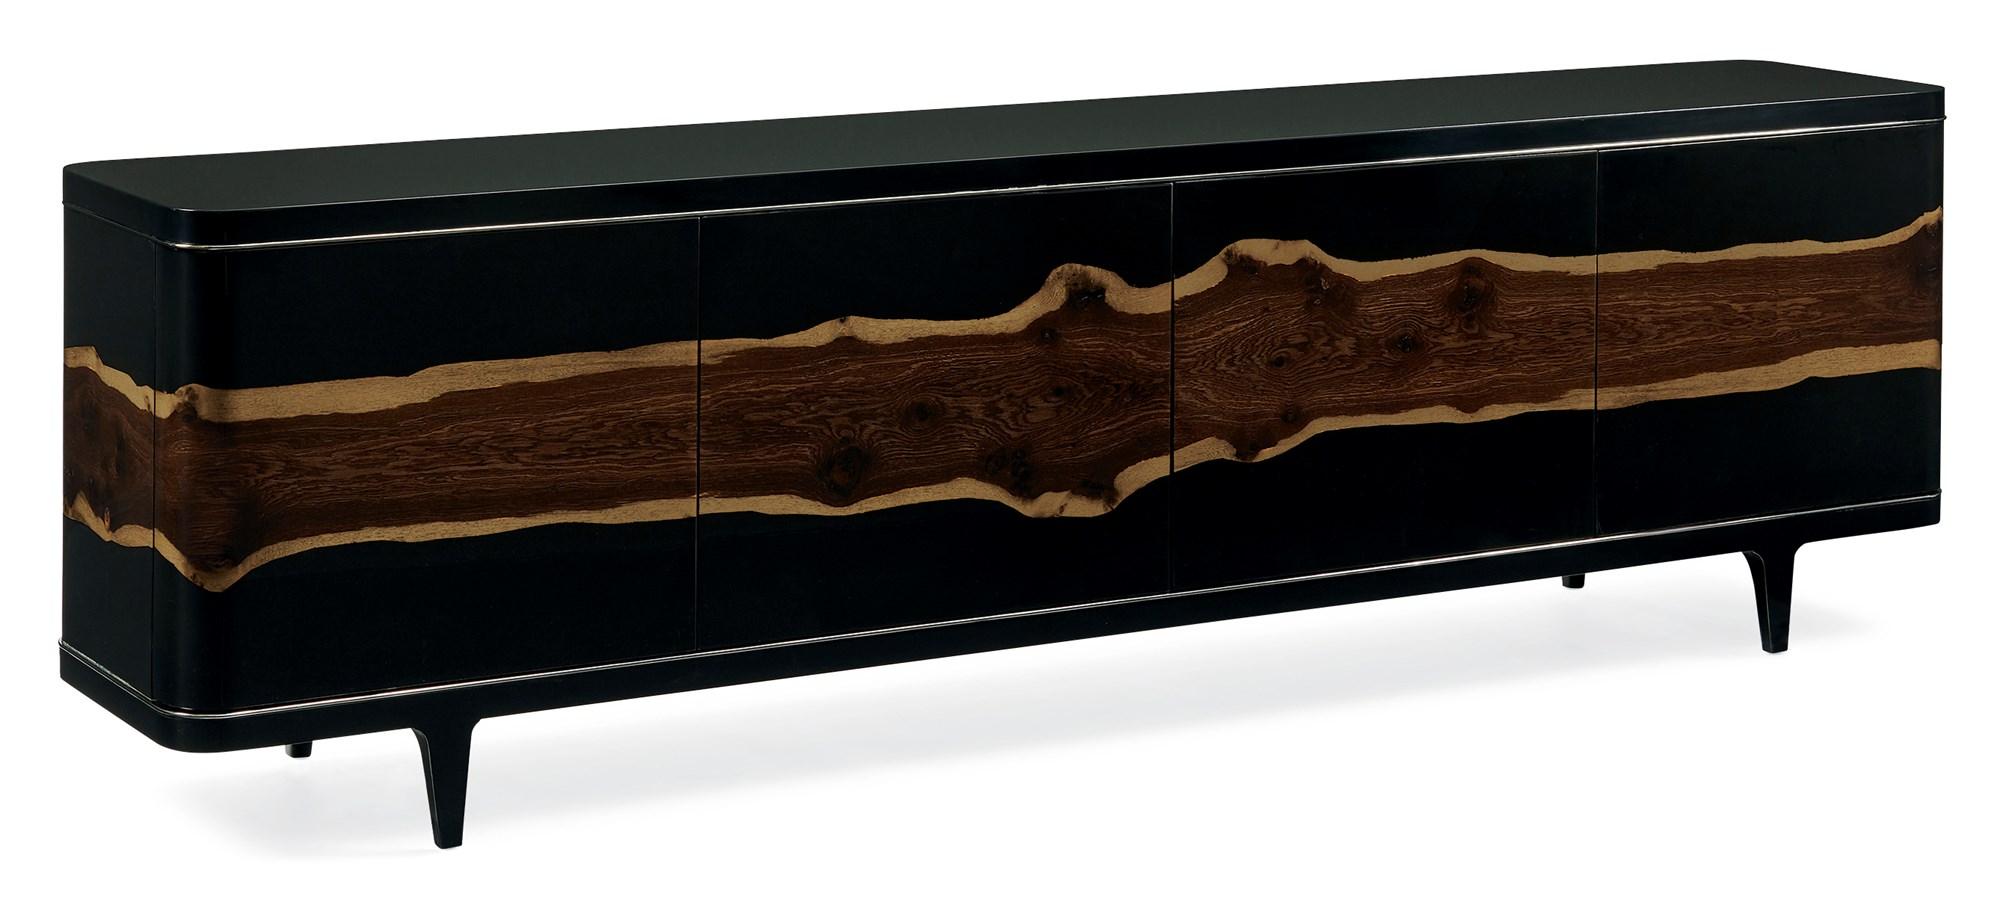 Contemporary Console Table THE NATURALIST ENTERTAINMENT CONSOLE SIG-017-531 in Oak, Black 